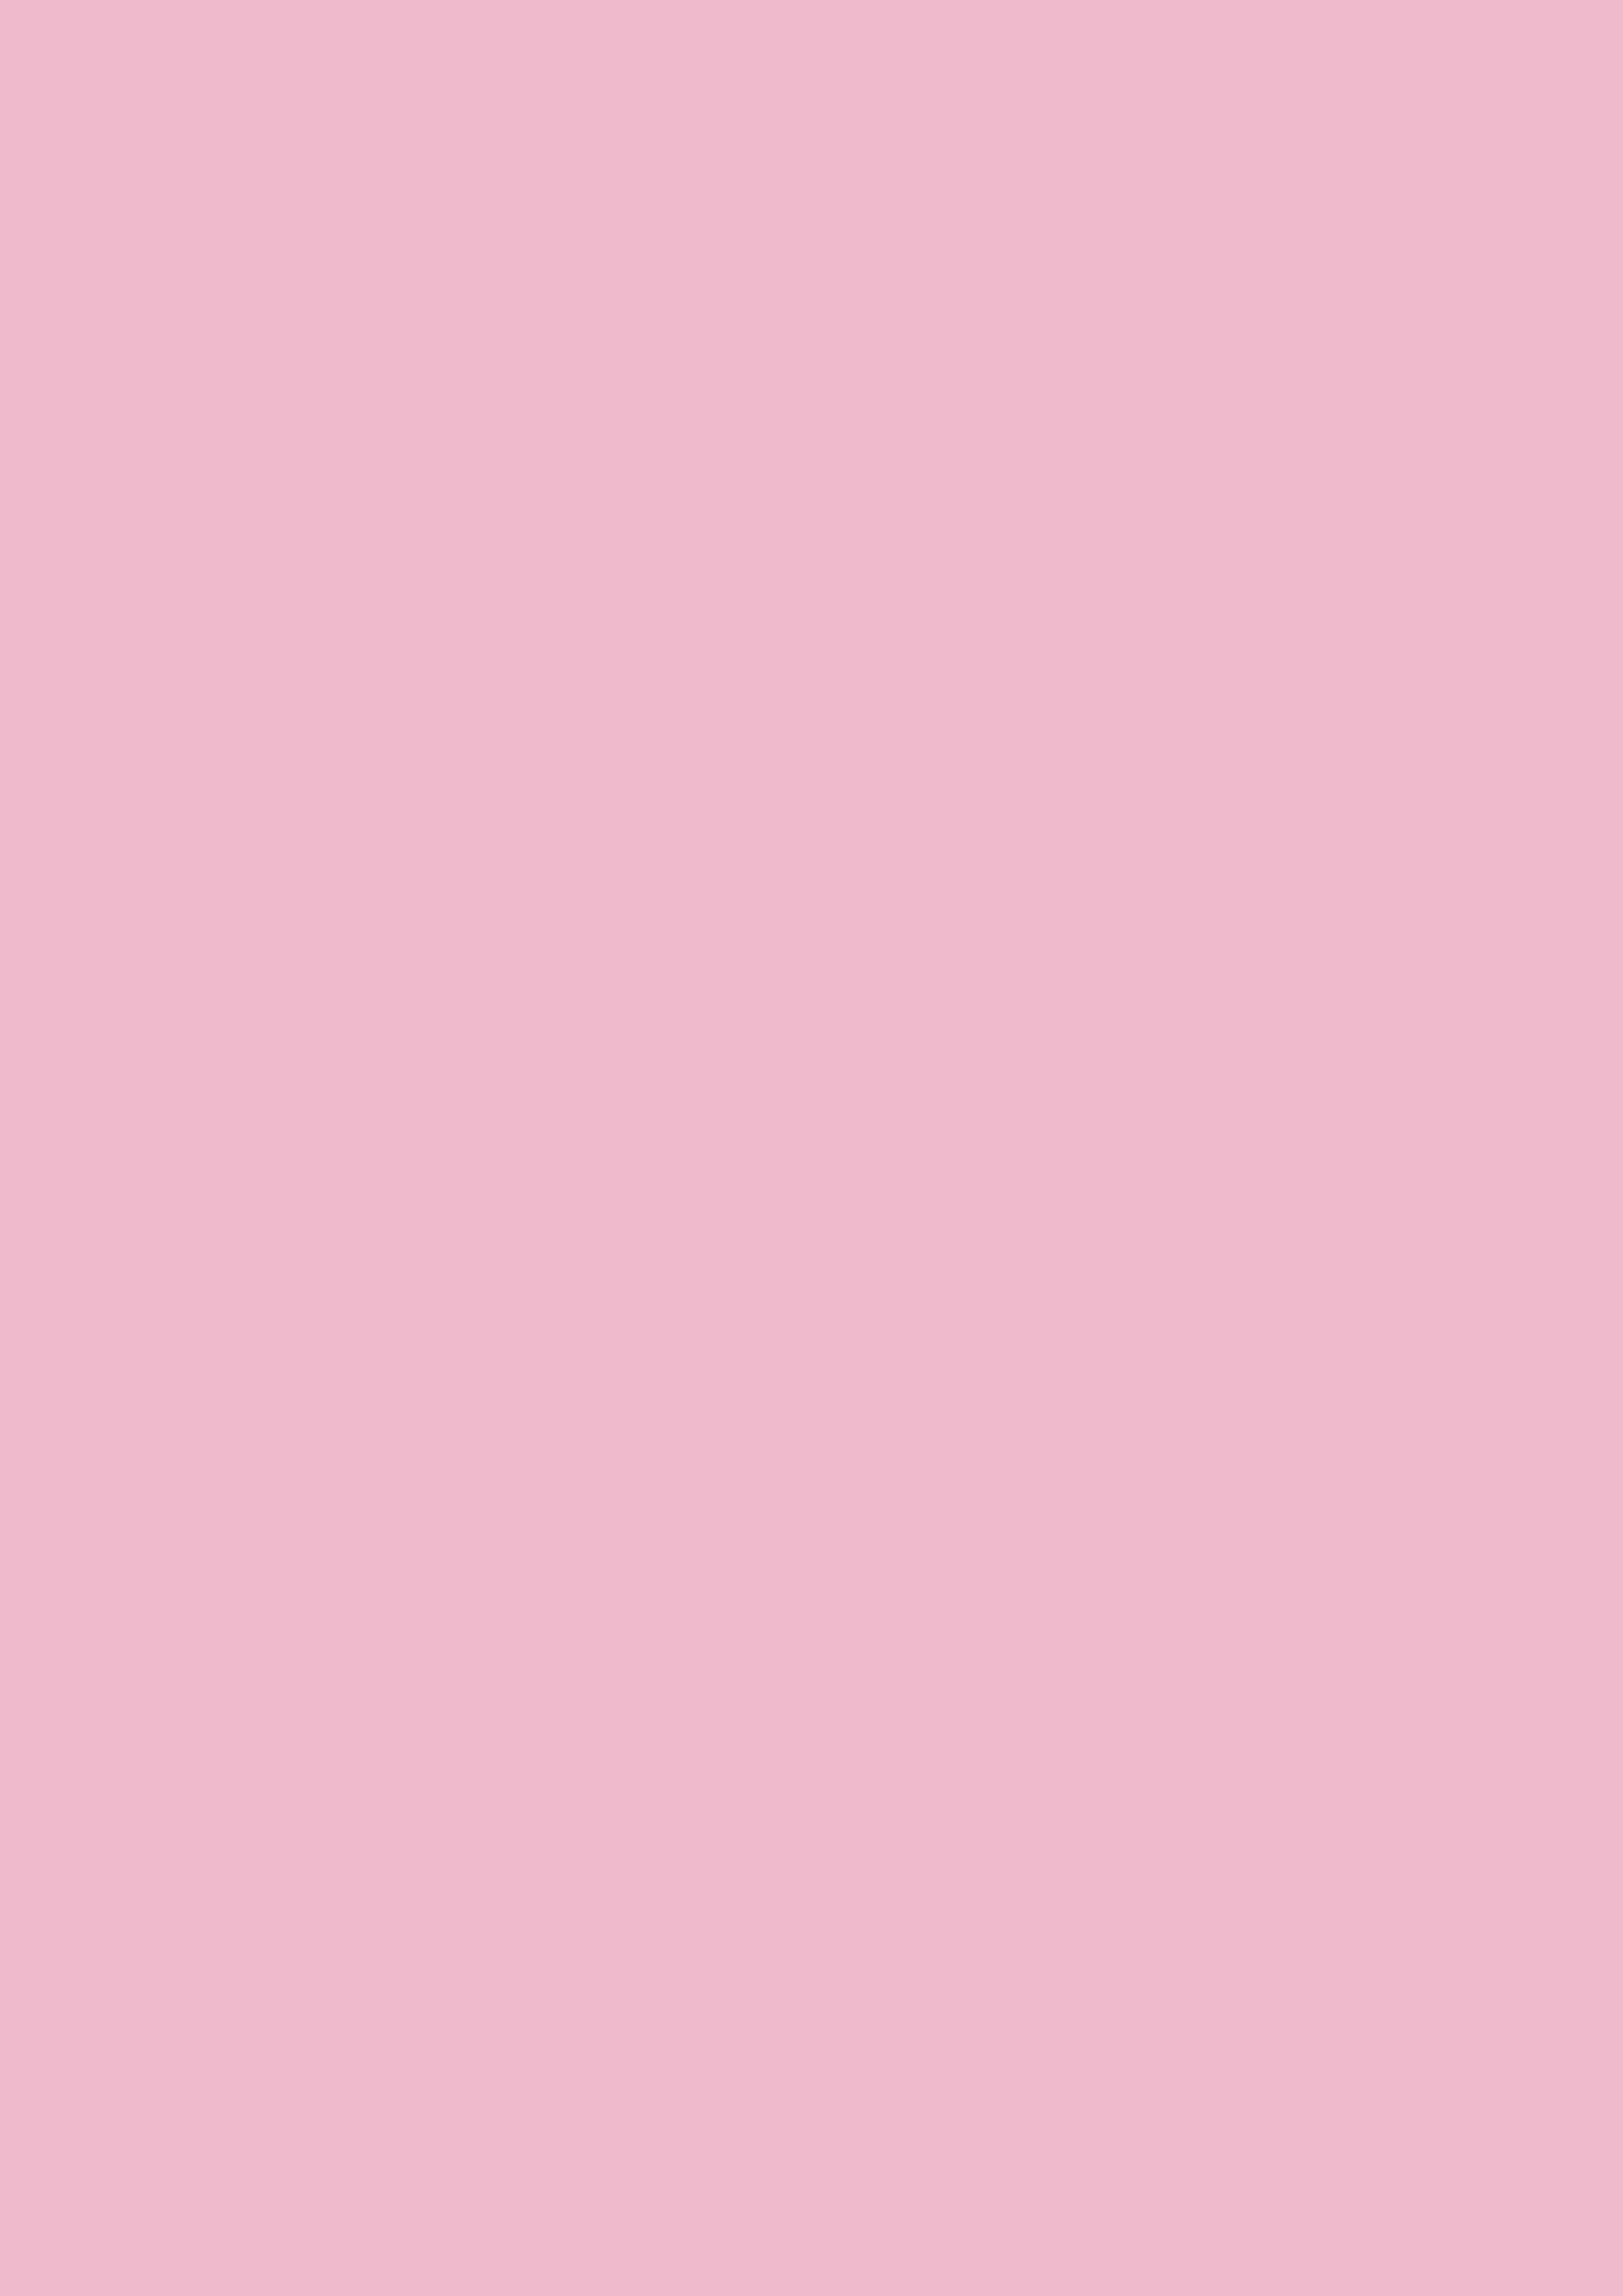 2480x3508 Cameo Pink Solid Color Background